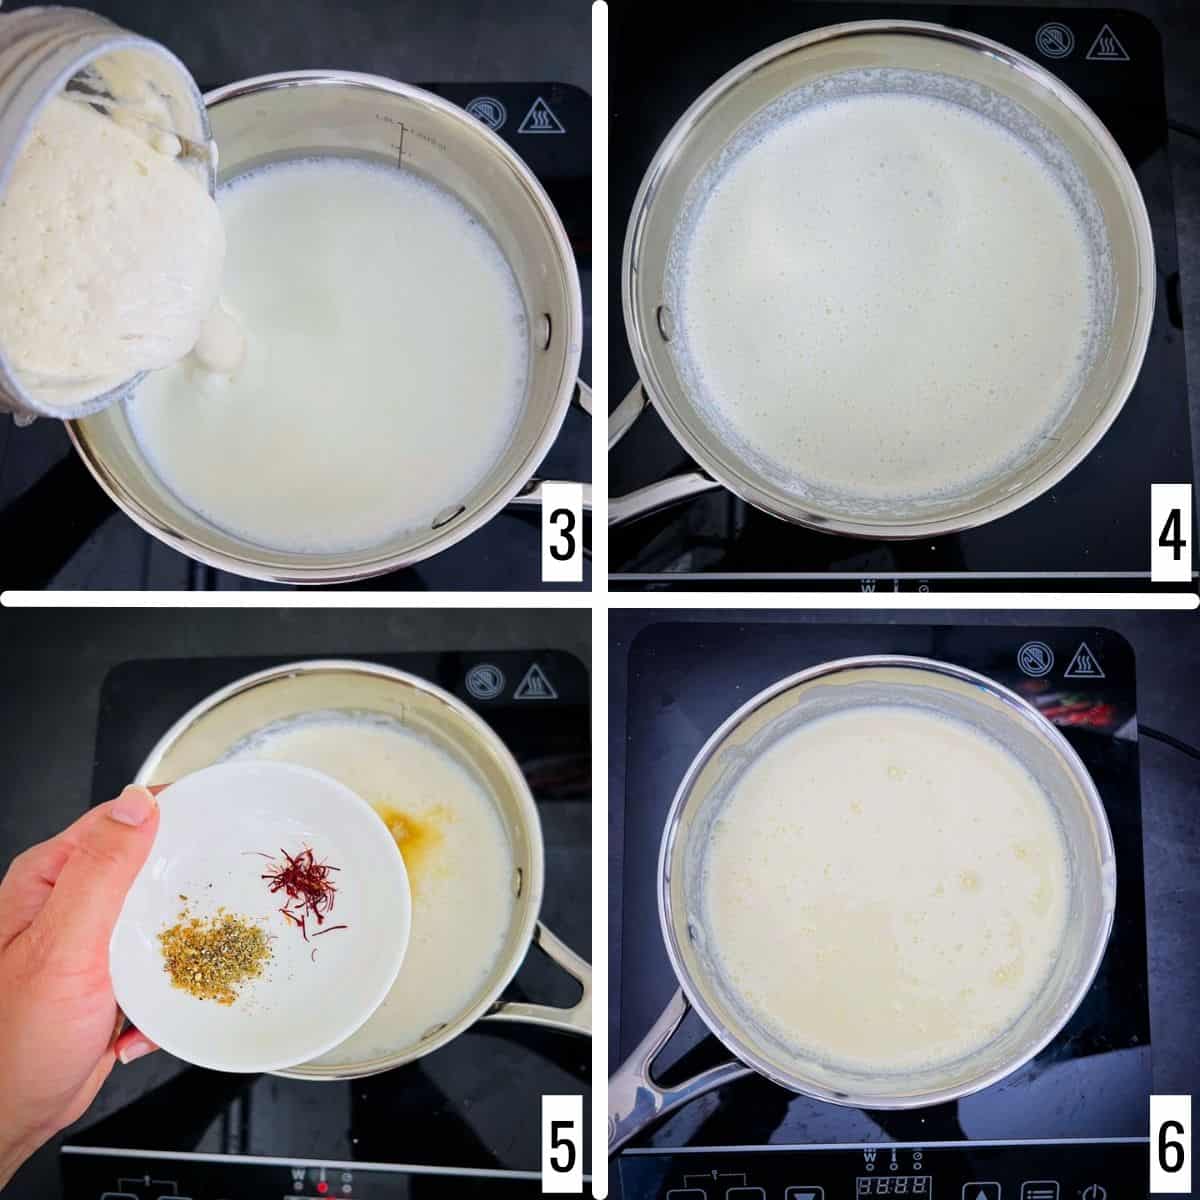 A 4-picture collage showing the preparation of this drink with spices and almonds.